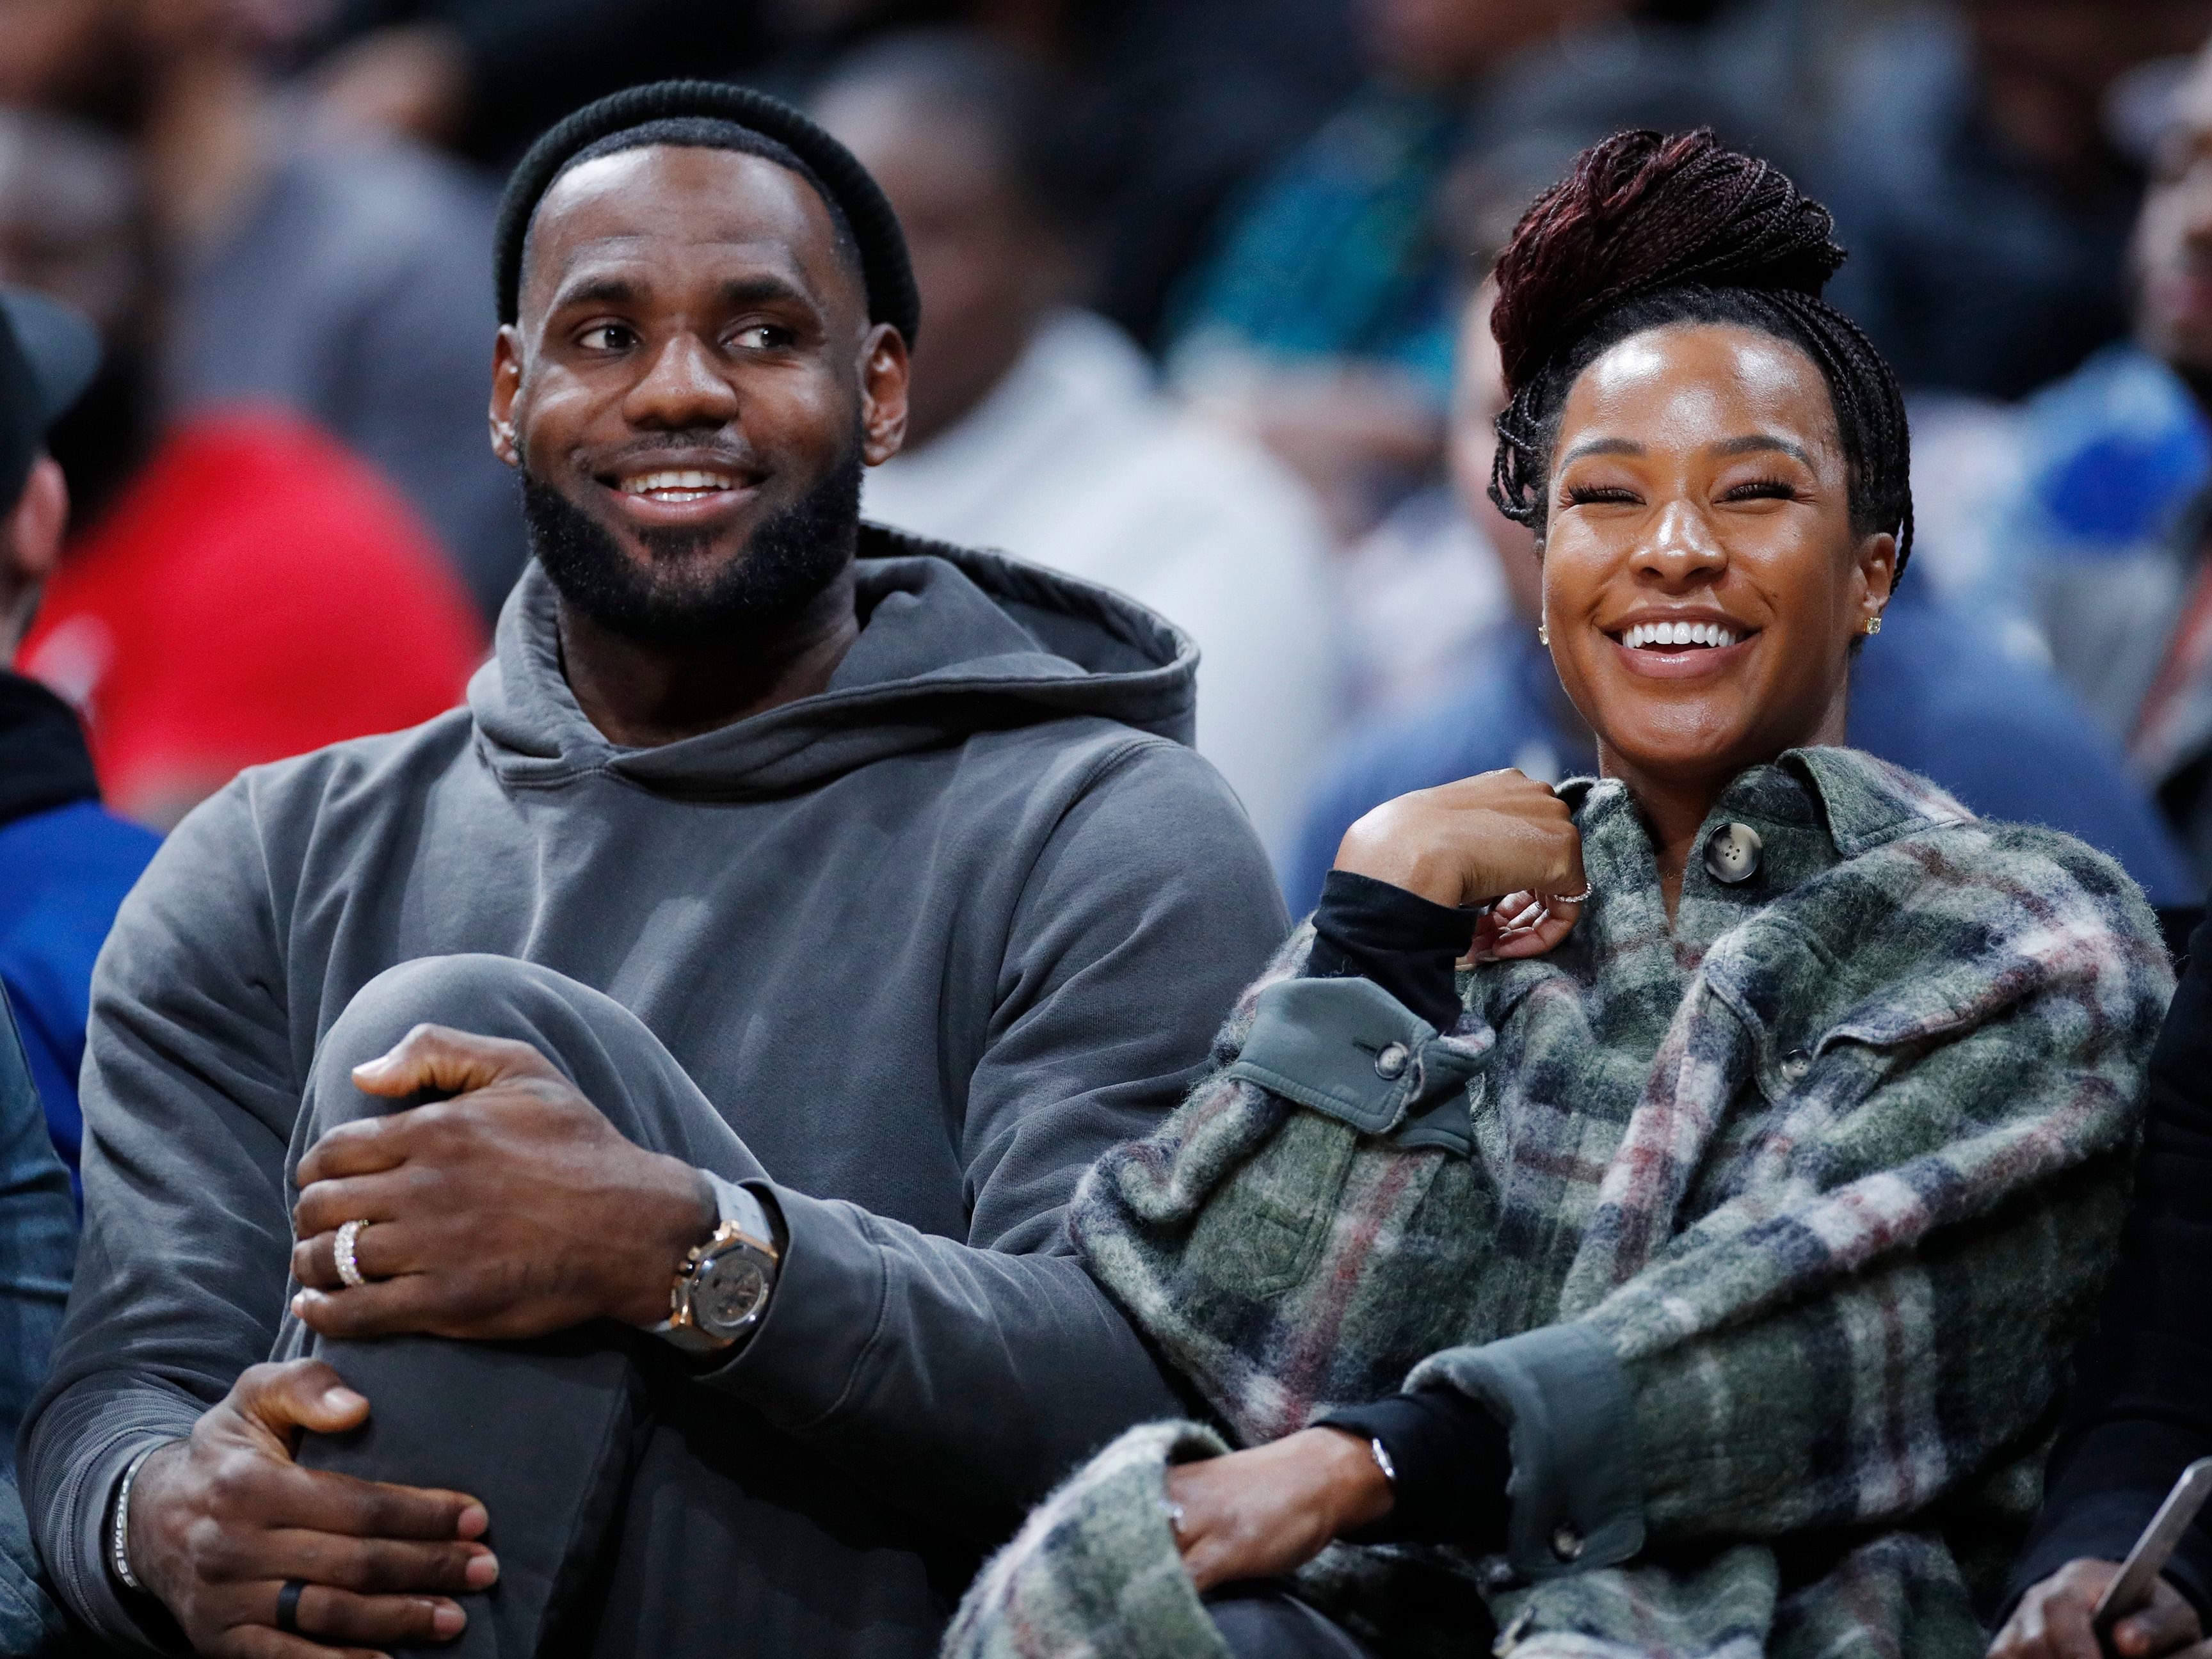 LeBron James' thirsty comment on wife Savannah's Instagram photo